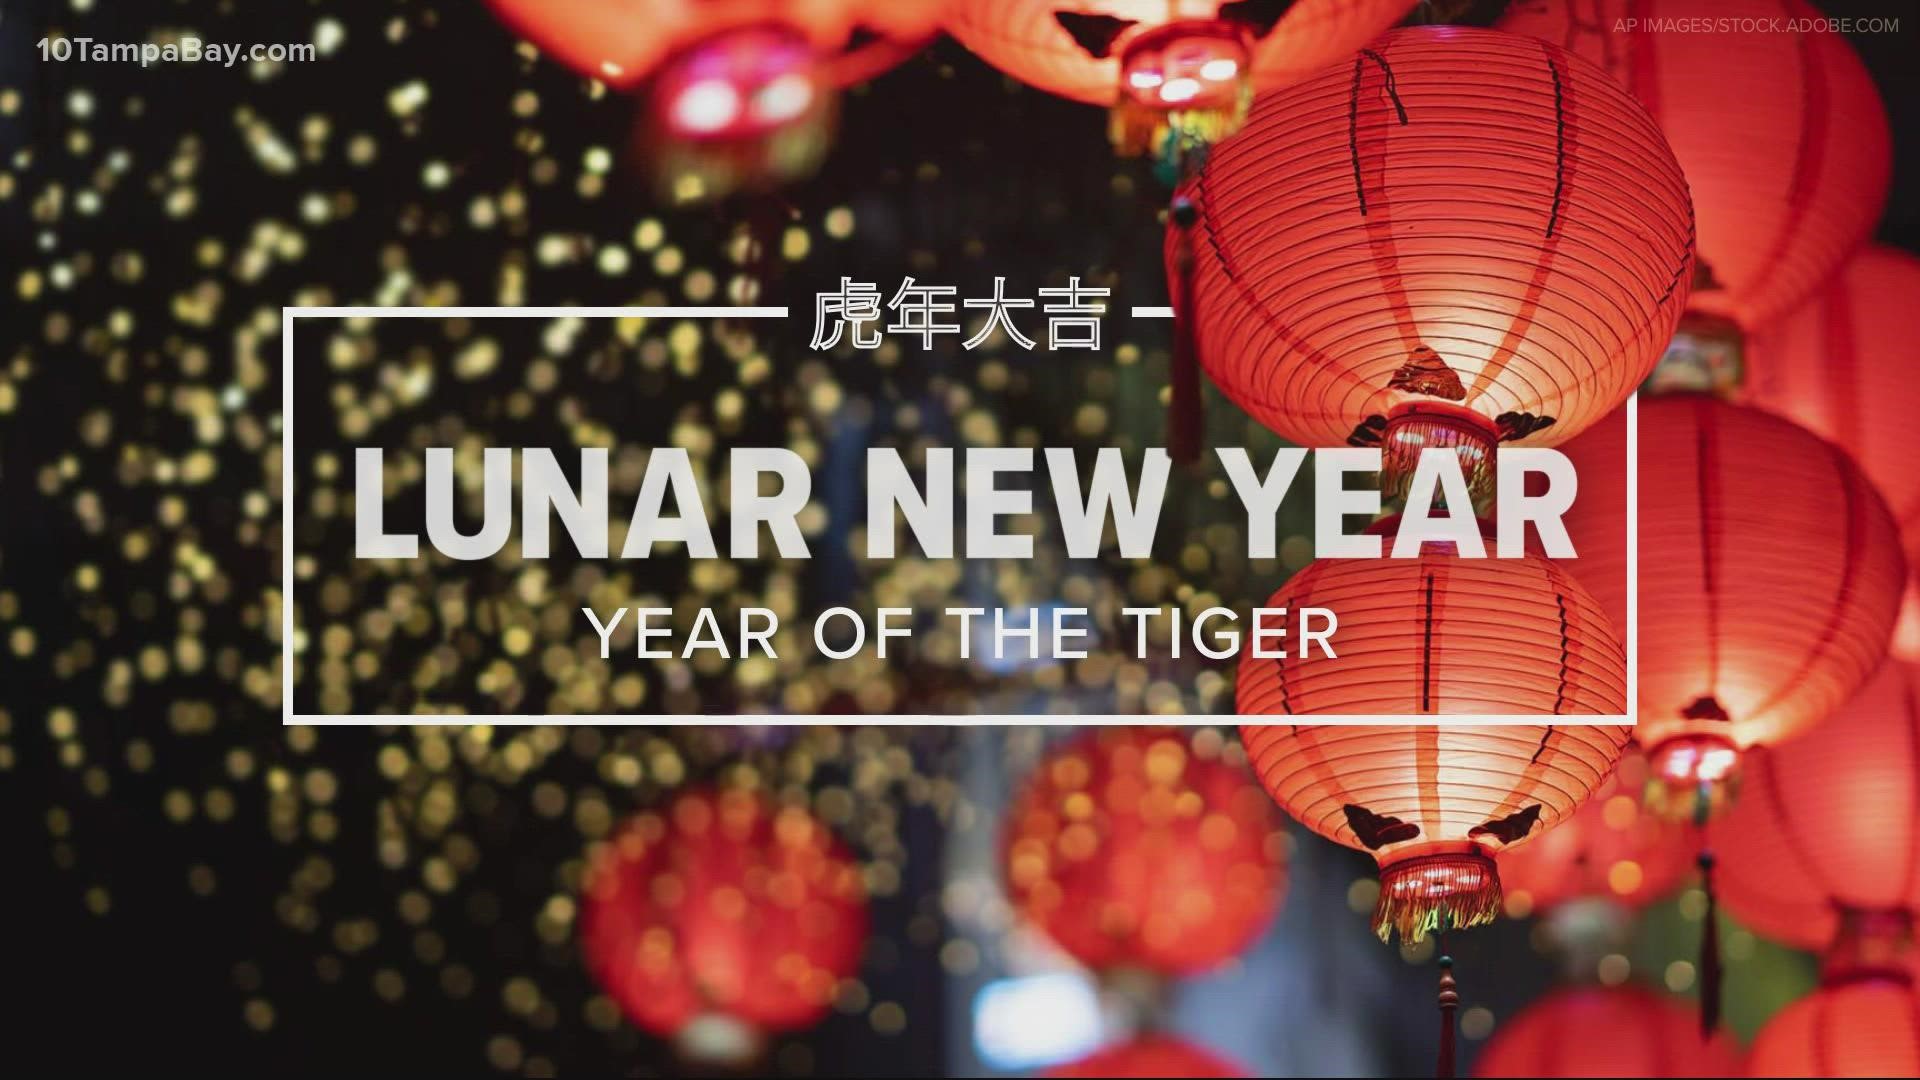 Lunar New Year, known as Spring Festival in China, falls on Feb. 1 this year, ushering in the Year of the Tiger.